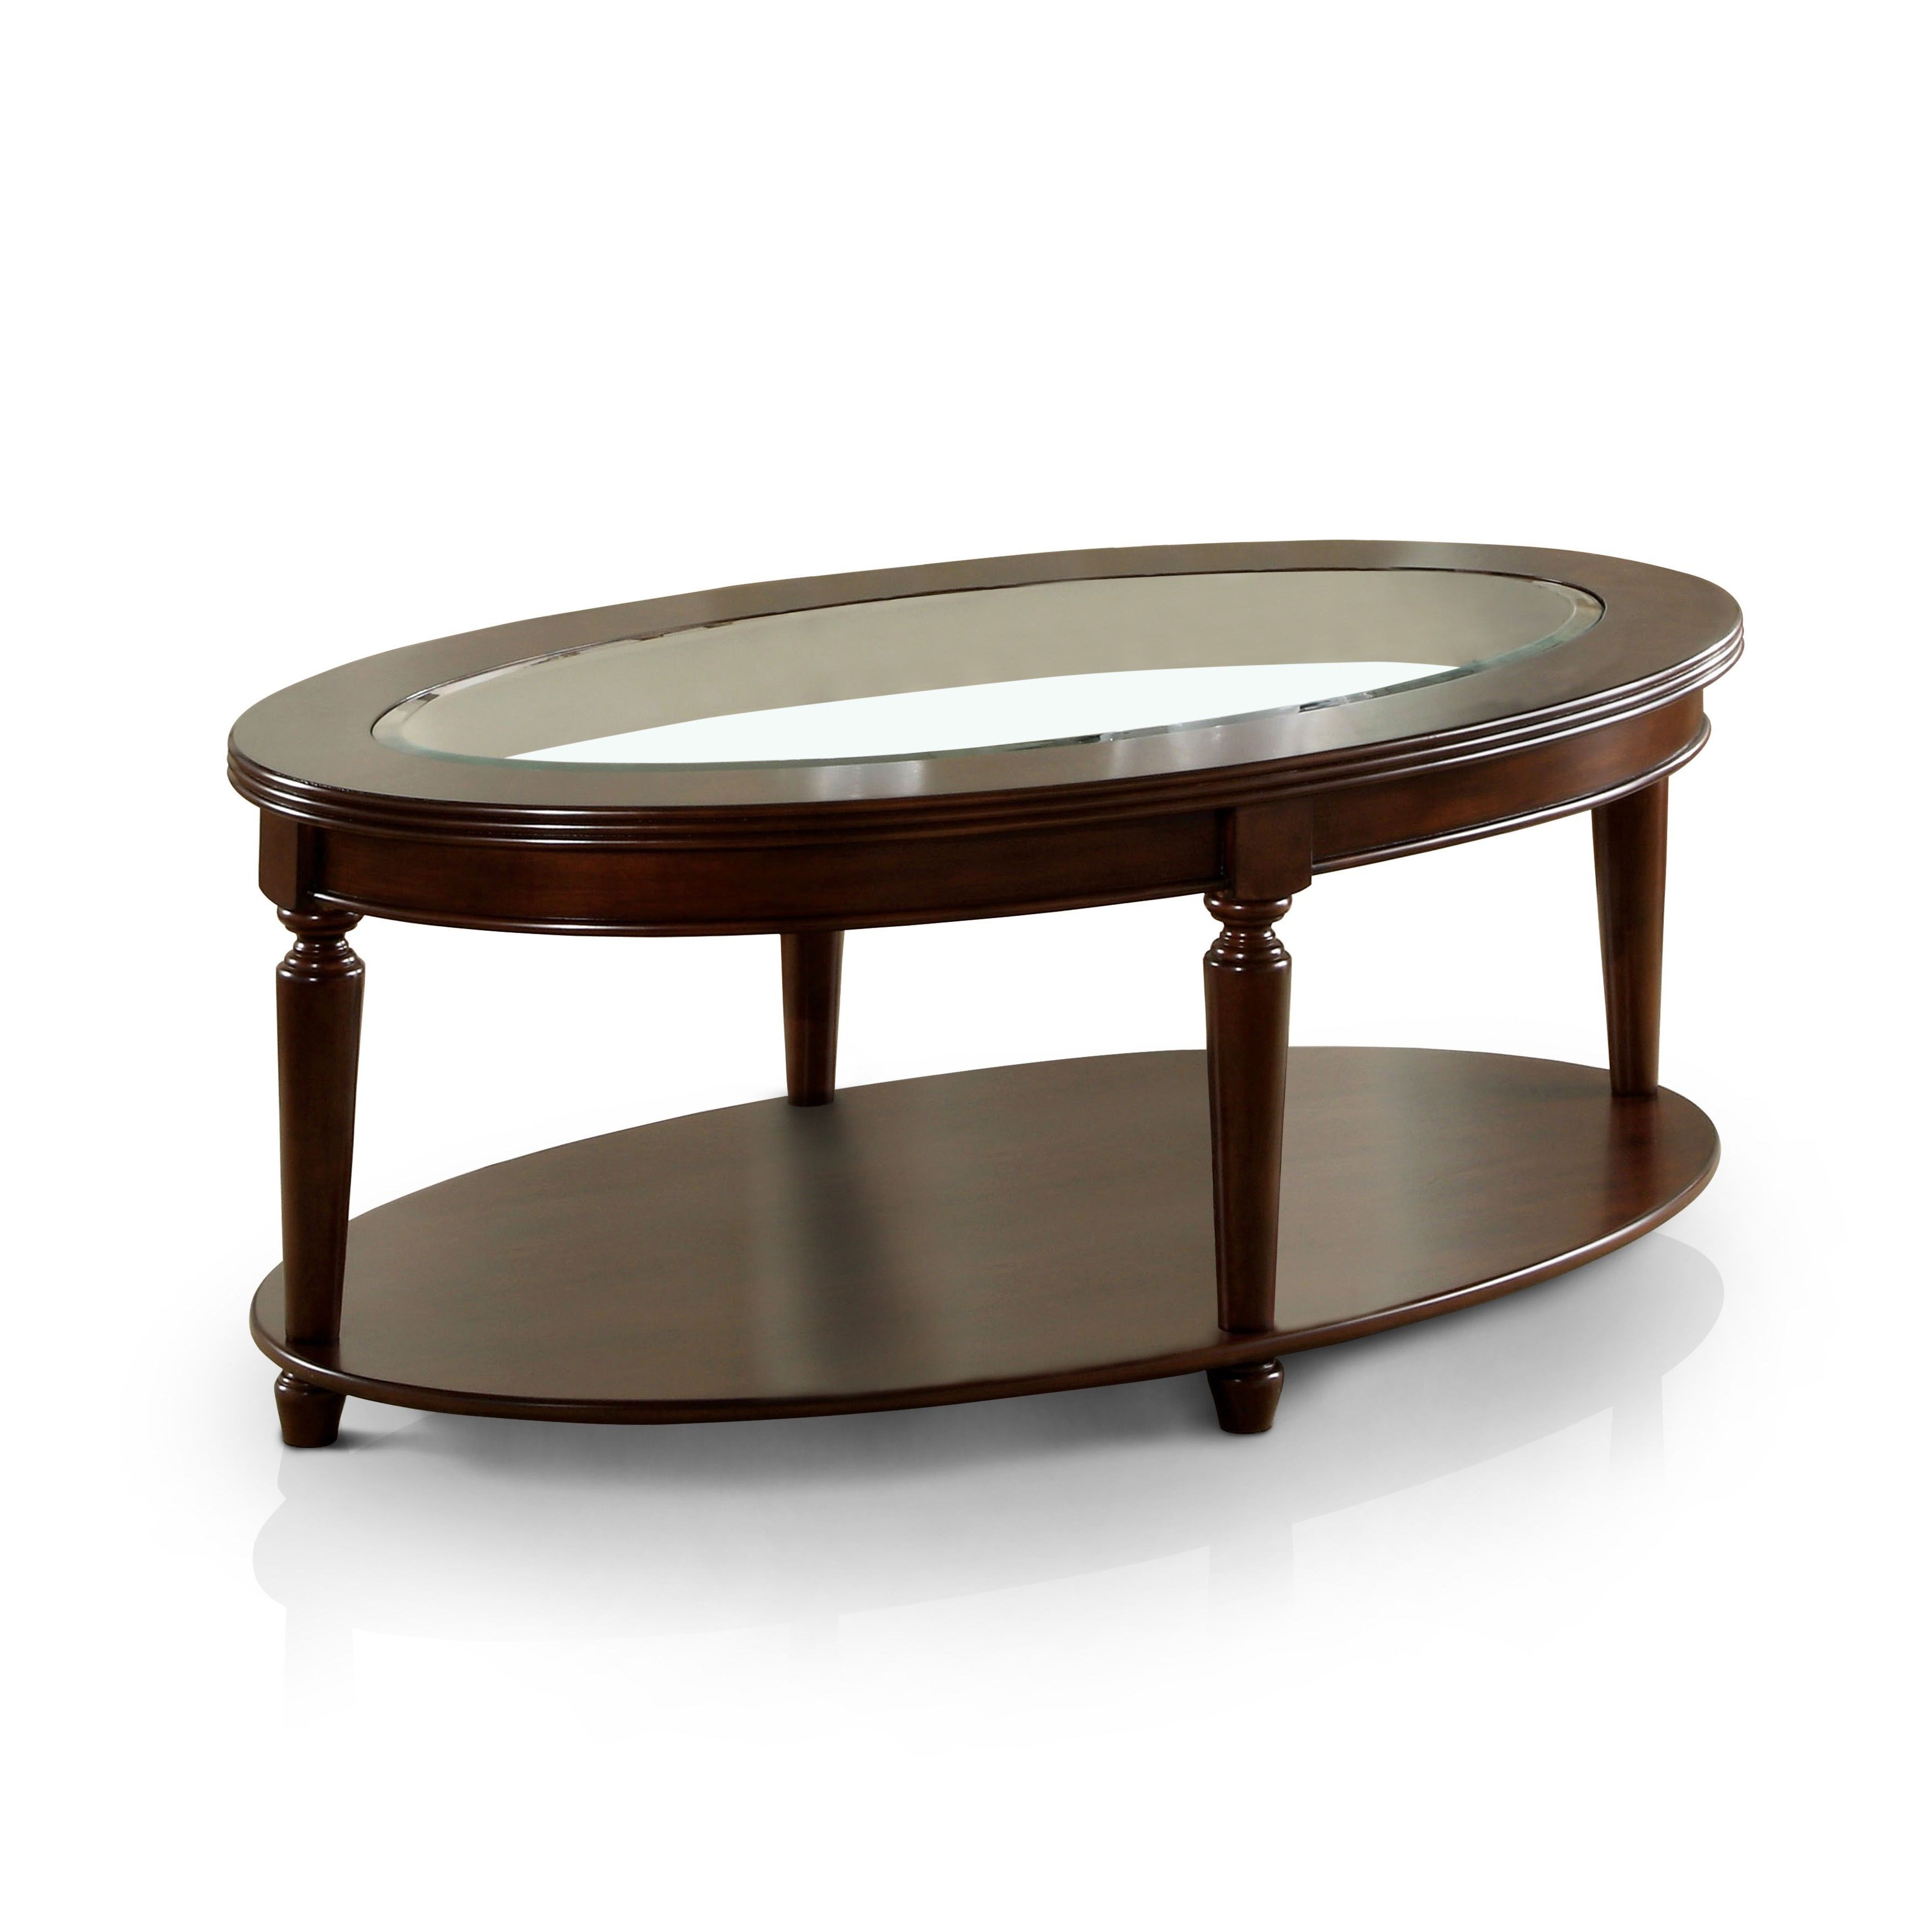 Popular Furniture Of America Crescent Dark Cherry Glass Top Oval Coffee Tables Throughout Furniture Of America Crescent Dark Cherry Glass Top Oval Coffee Table (View 2 of 20)